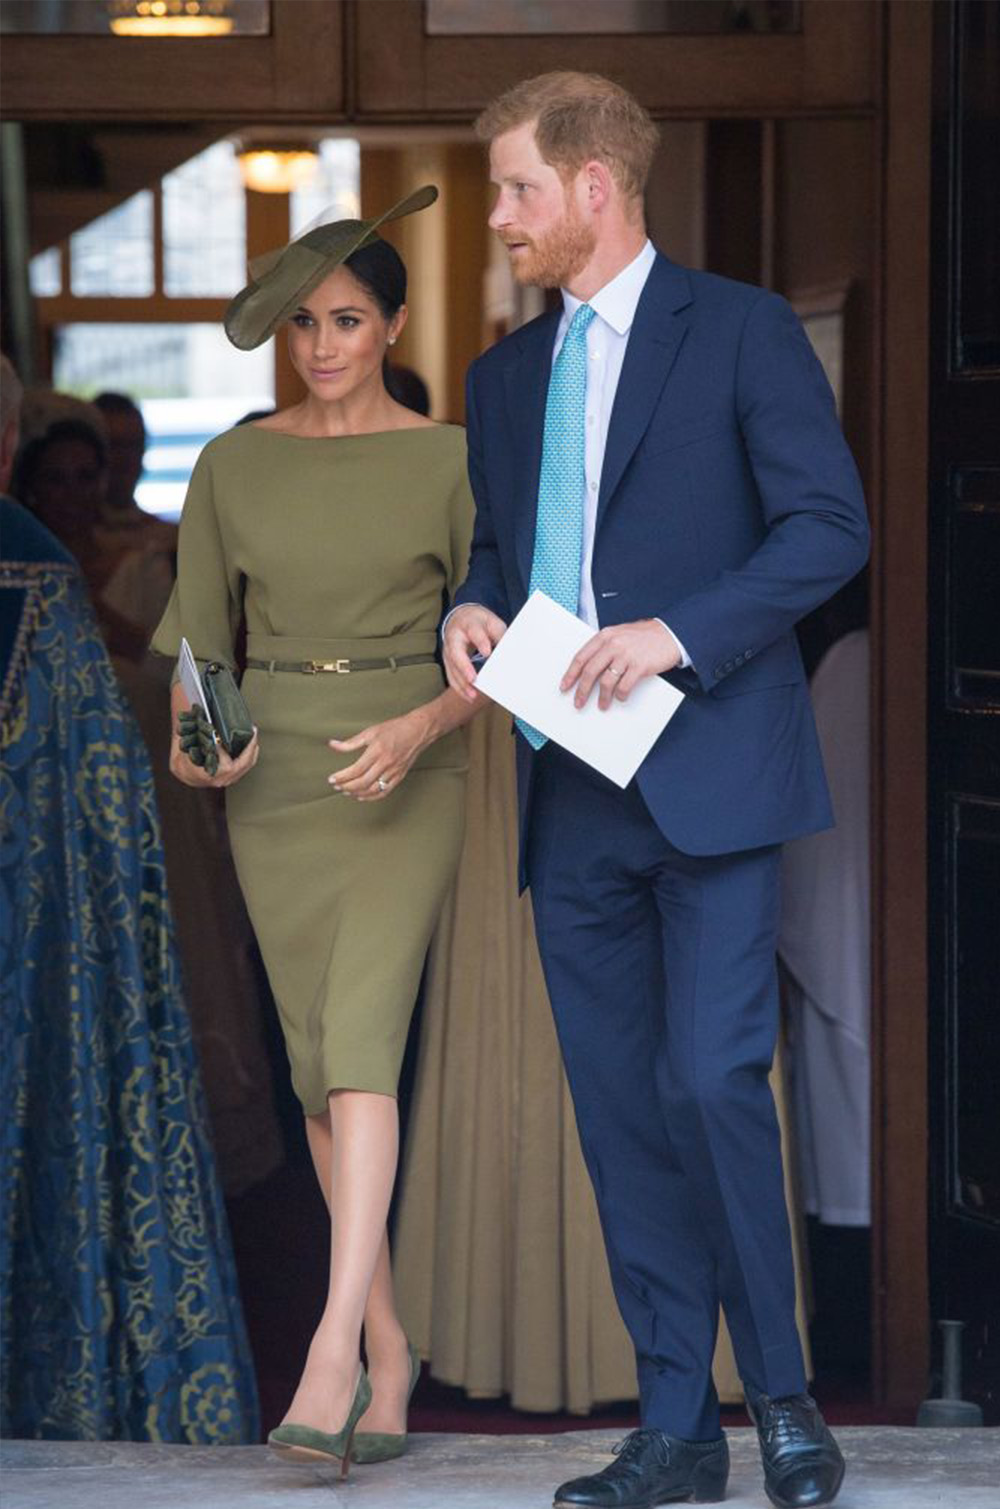 July 10, 2018: Prince Harry, Duke of Sussex and Meghan, Duchess of Sussex arrive at Dublin Airport. Meghan opts for an emerald green Givenchy number, fitting in both senses of the word given that Ireland is known as the Emerald Isle. A hue that sister-in-law Kate Middleton also frequents on the likes of St Patrick’s Day. Shoes, also by Givenchy, and bag by Strathberry complete this regal ensemble. | meghan-markle-duchess-sussex-09-july-2018-1000_gallery